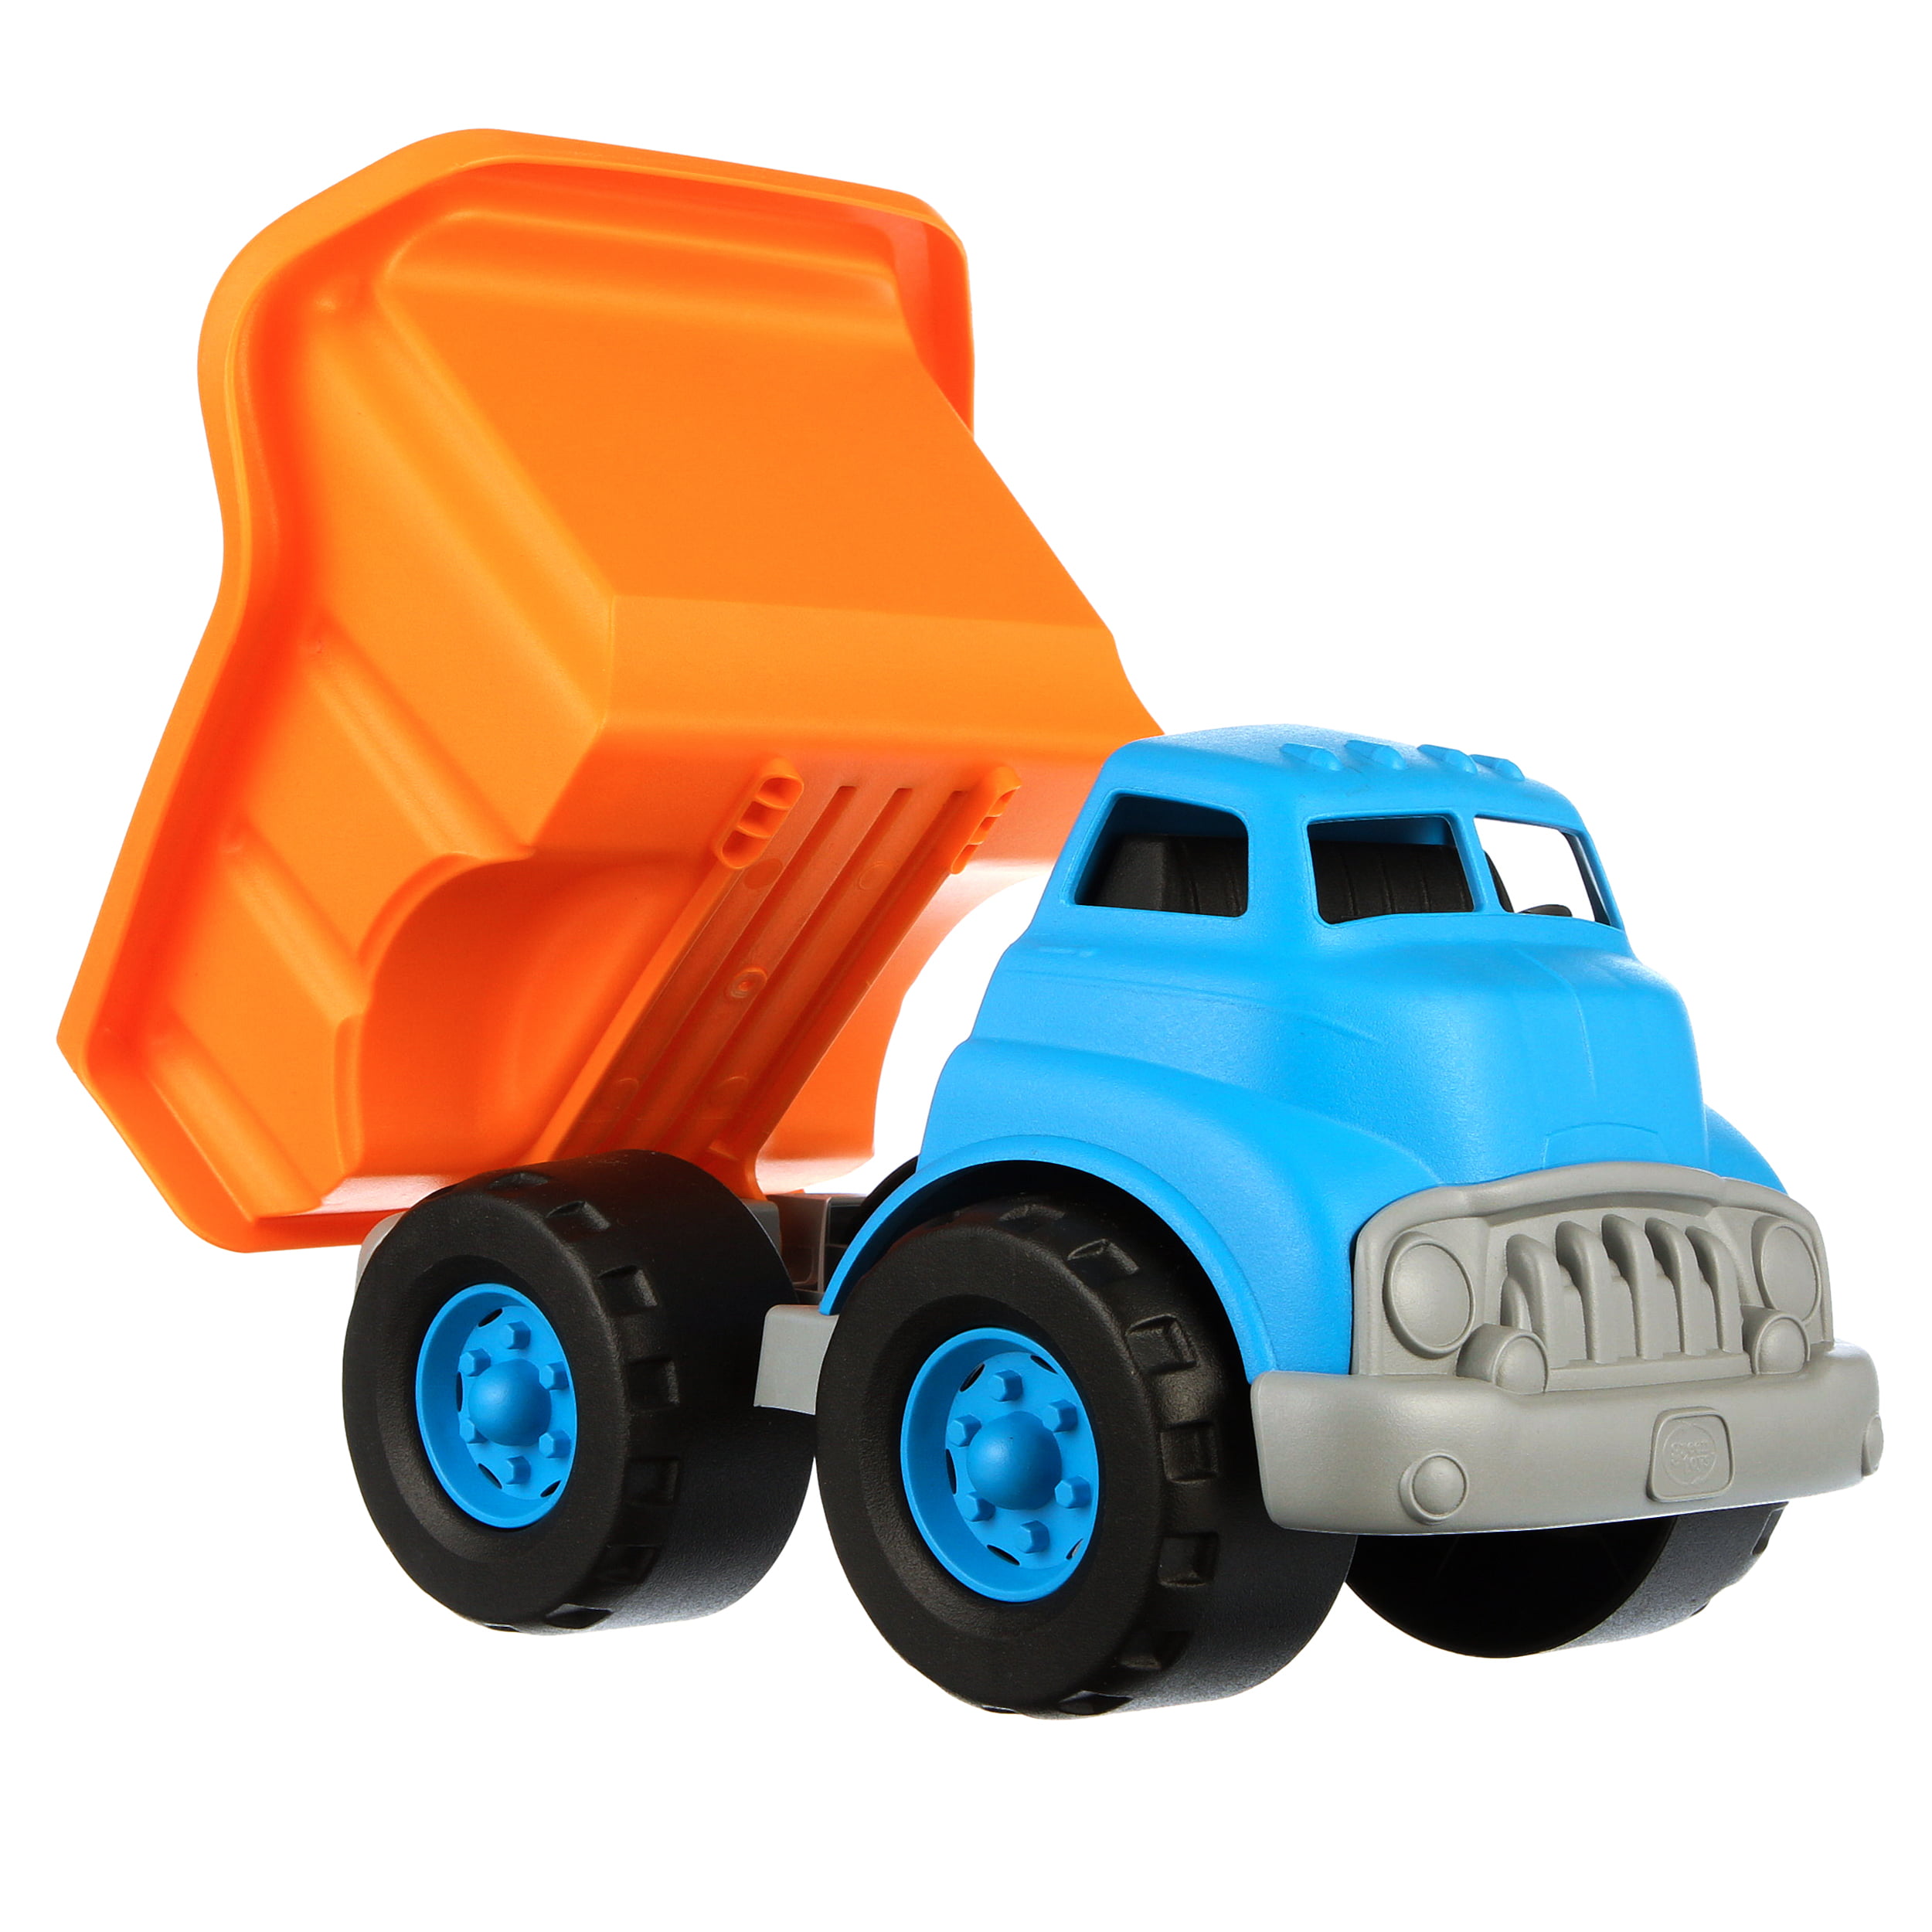 Green Toys Dump Truck in Blue and Orange - Play Vehicles, for Toddlers Ages  1+